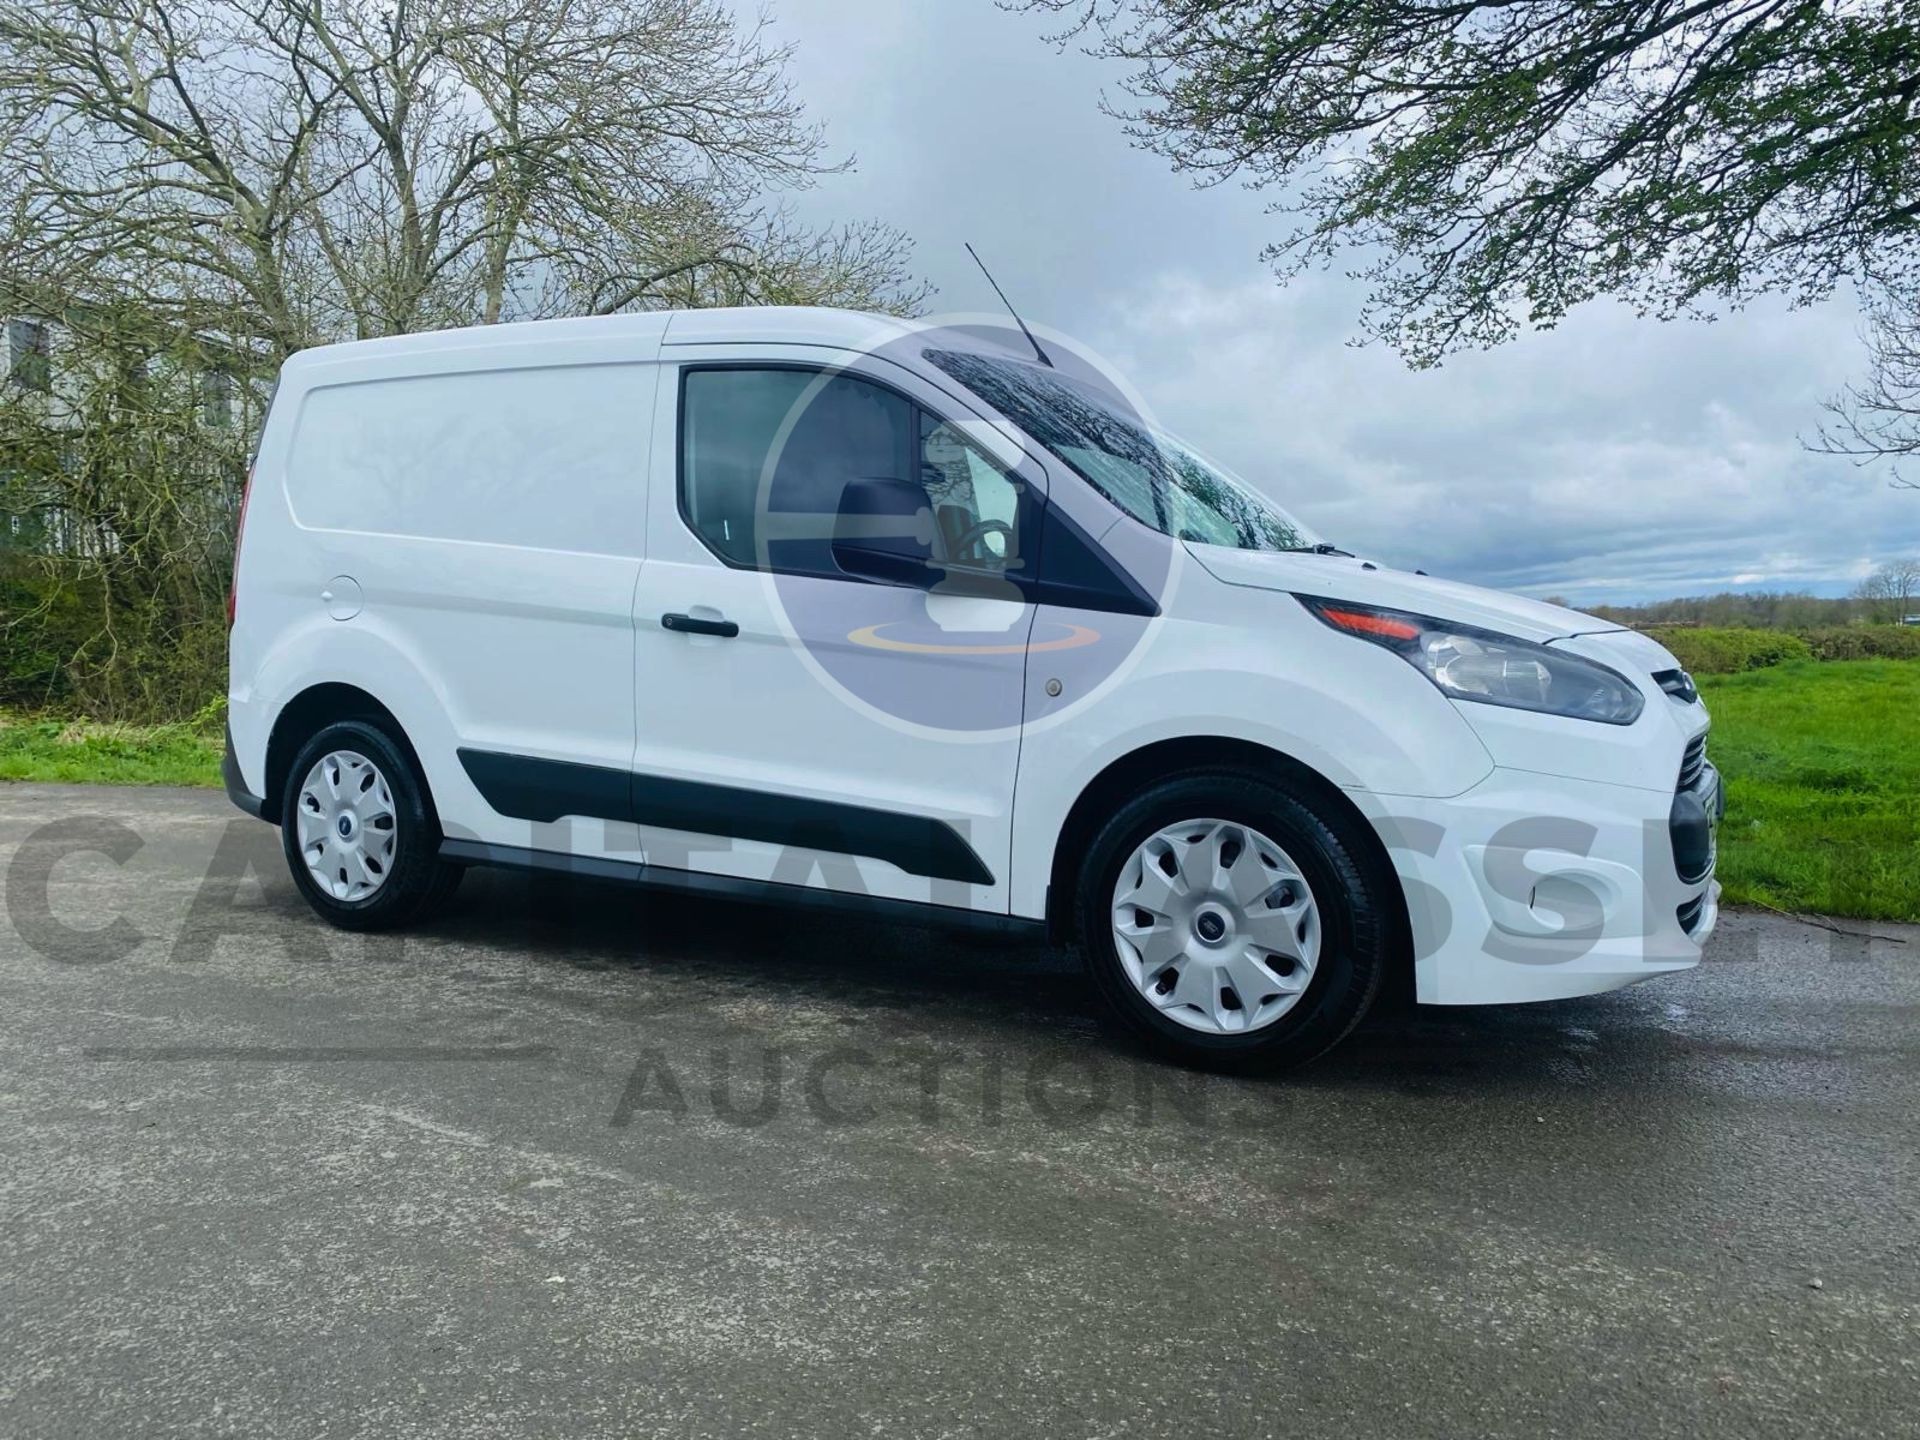 (ON SALE) FORD TRANSIT CONNECT *TREND EDITION* SWB PANEL VAN (2017 - EURO 6) 1.5 TDCI - Image 8 of 24